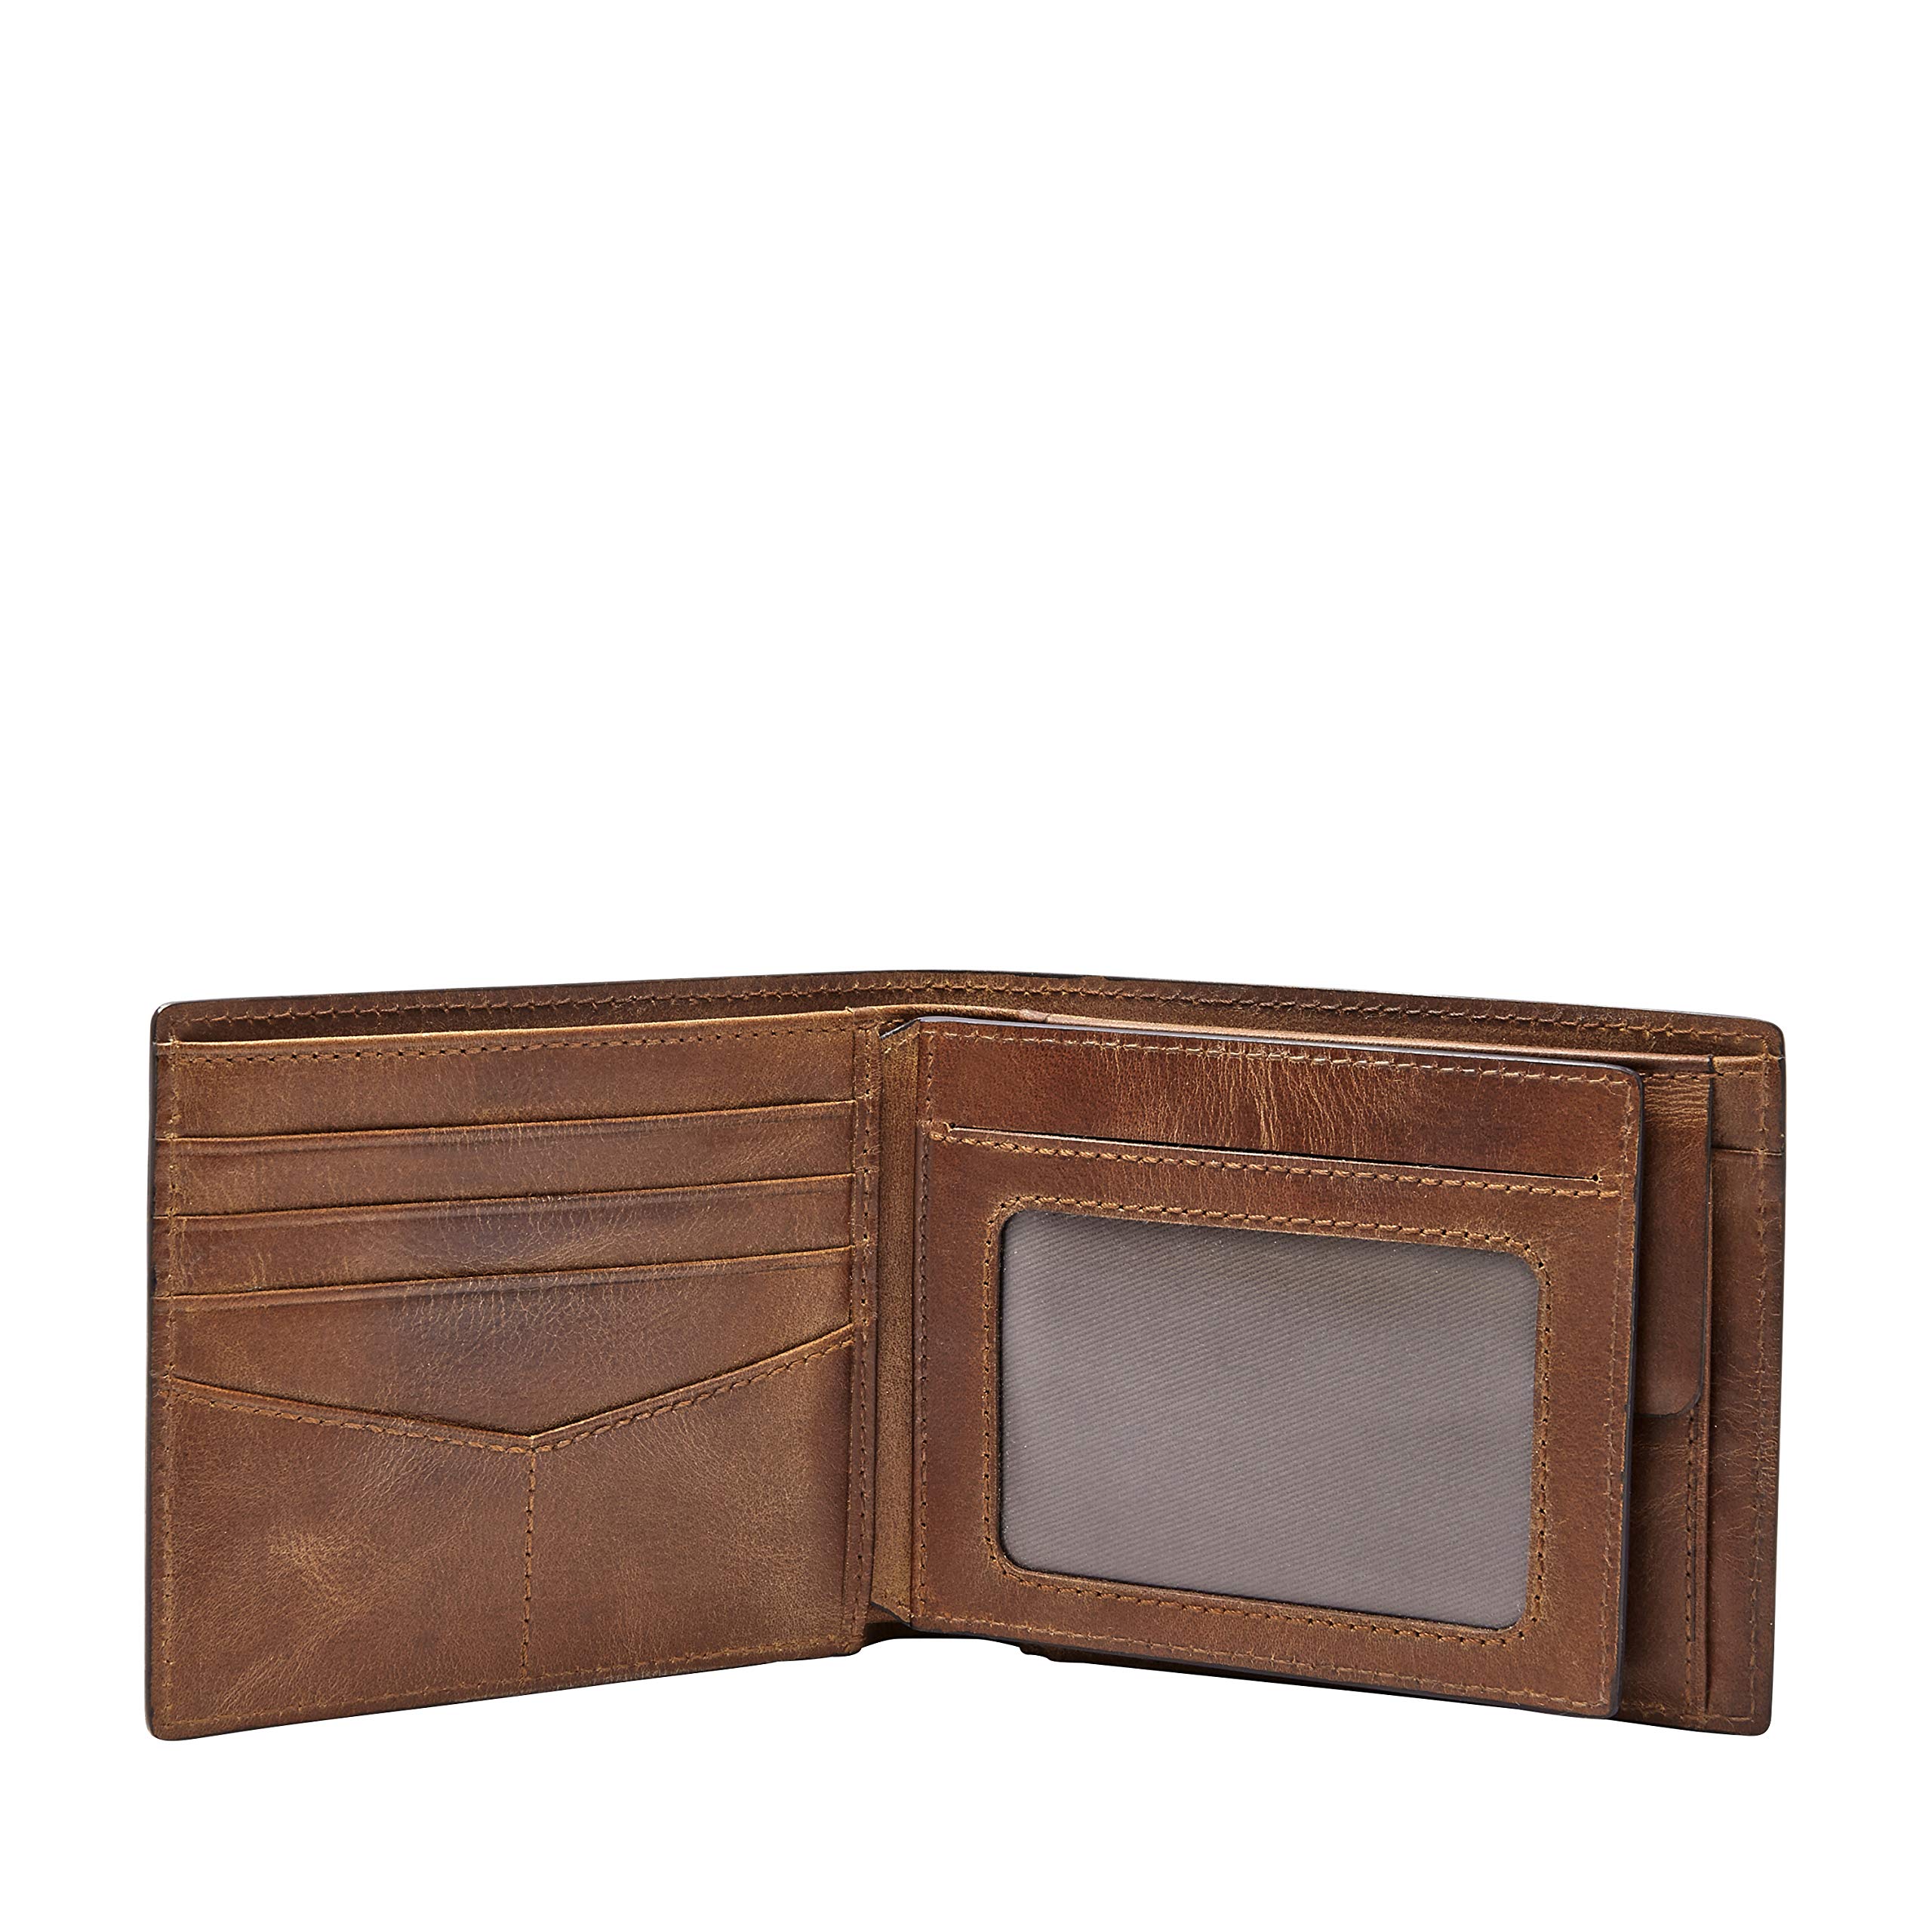 Fossil Men's Derrick Leather RFID-Blocking Large Bifold with Coin Pocket Wallet for Men